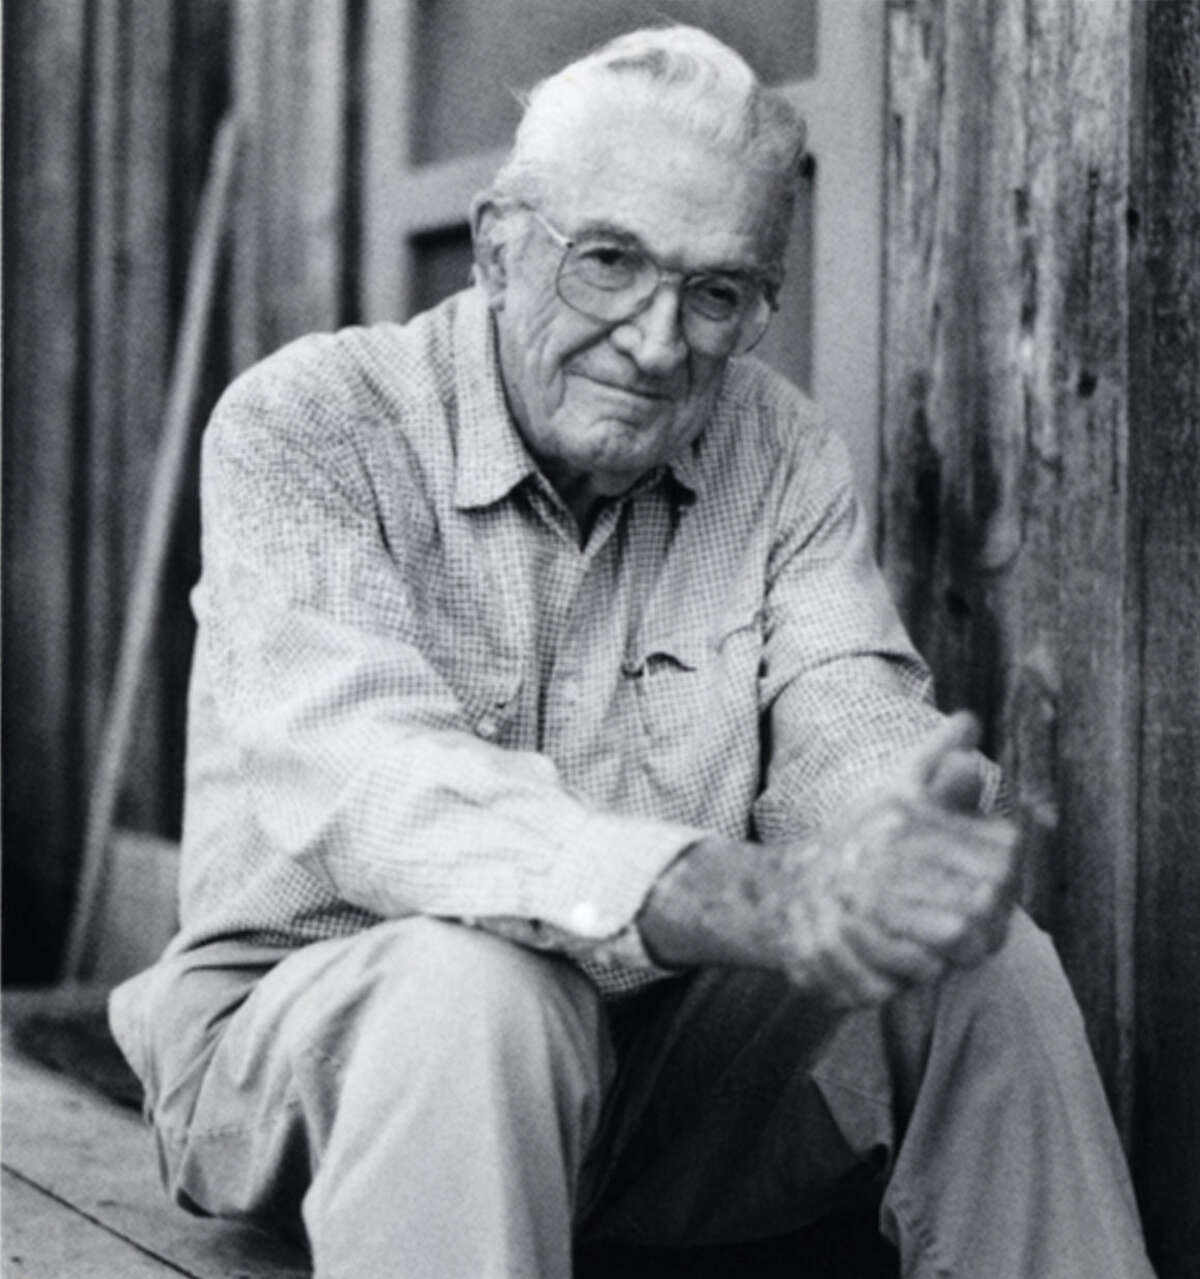 John Graves, a Texas writer whose book about a canoe trip down the Brazos River in the late 1950s, is regarded as a classic, died on July 30 at Hard Scrabble, his small farm outside Glen Rose